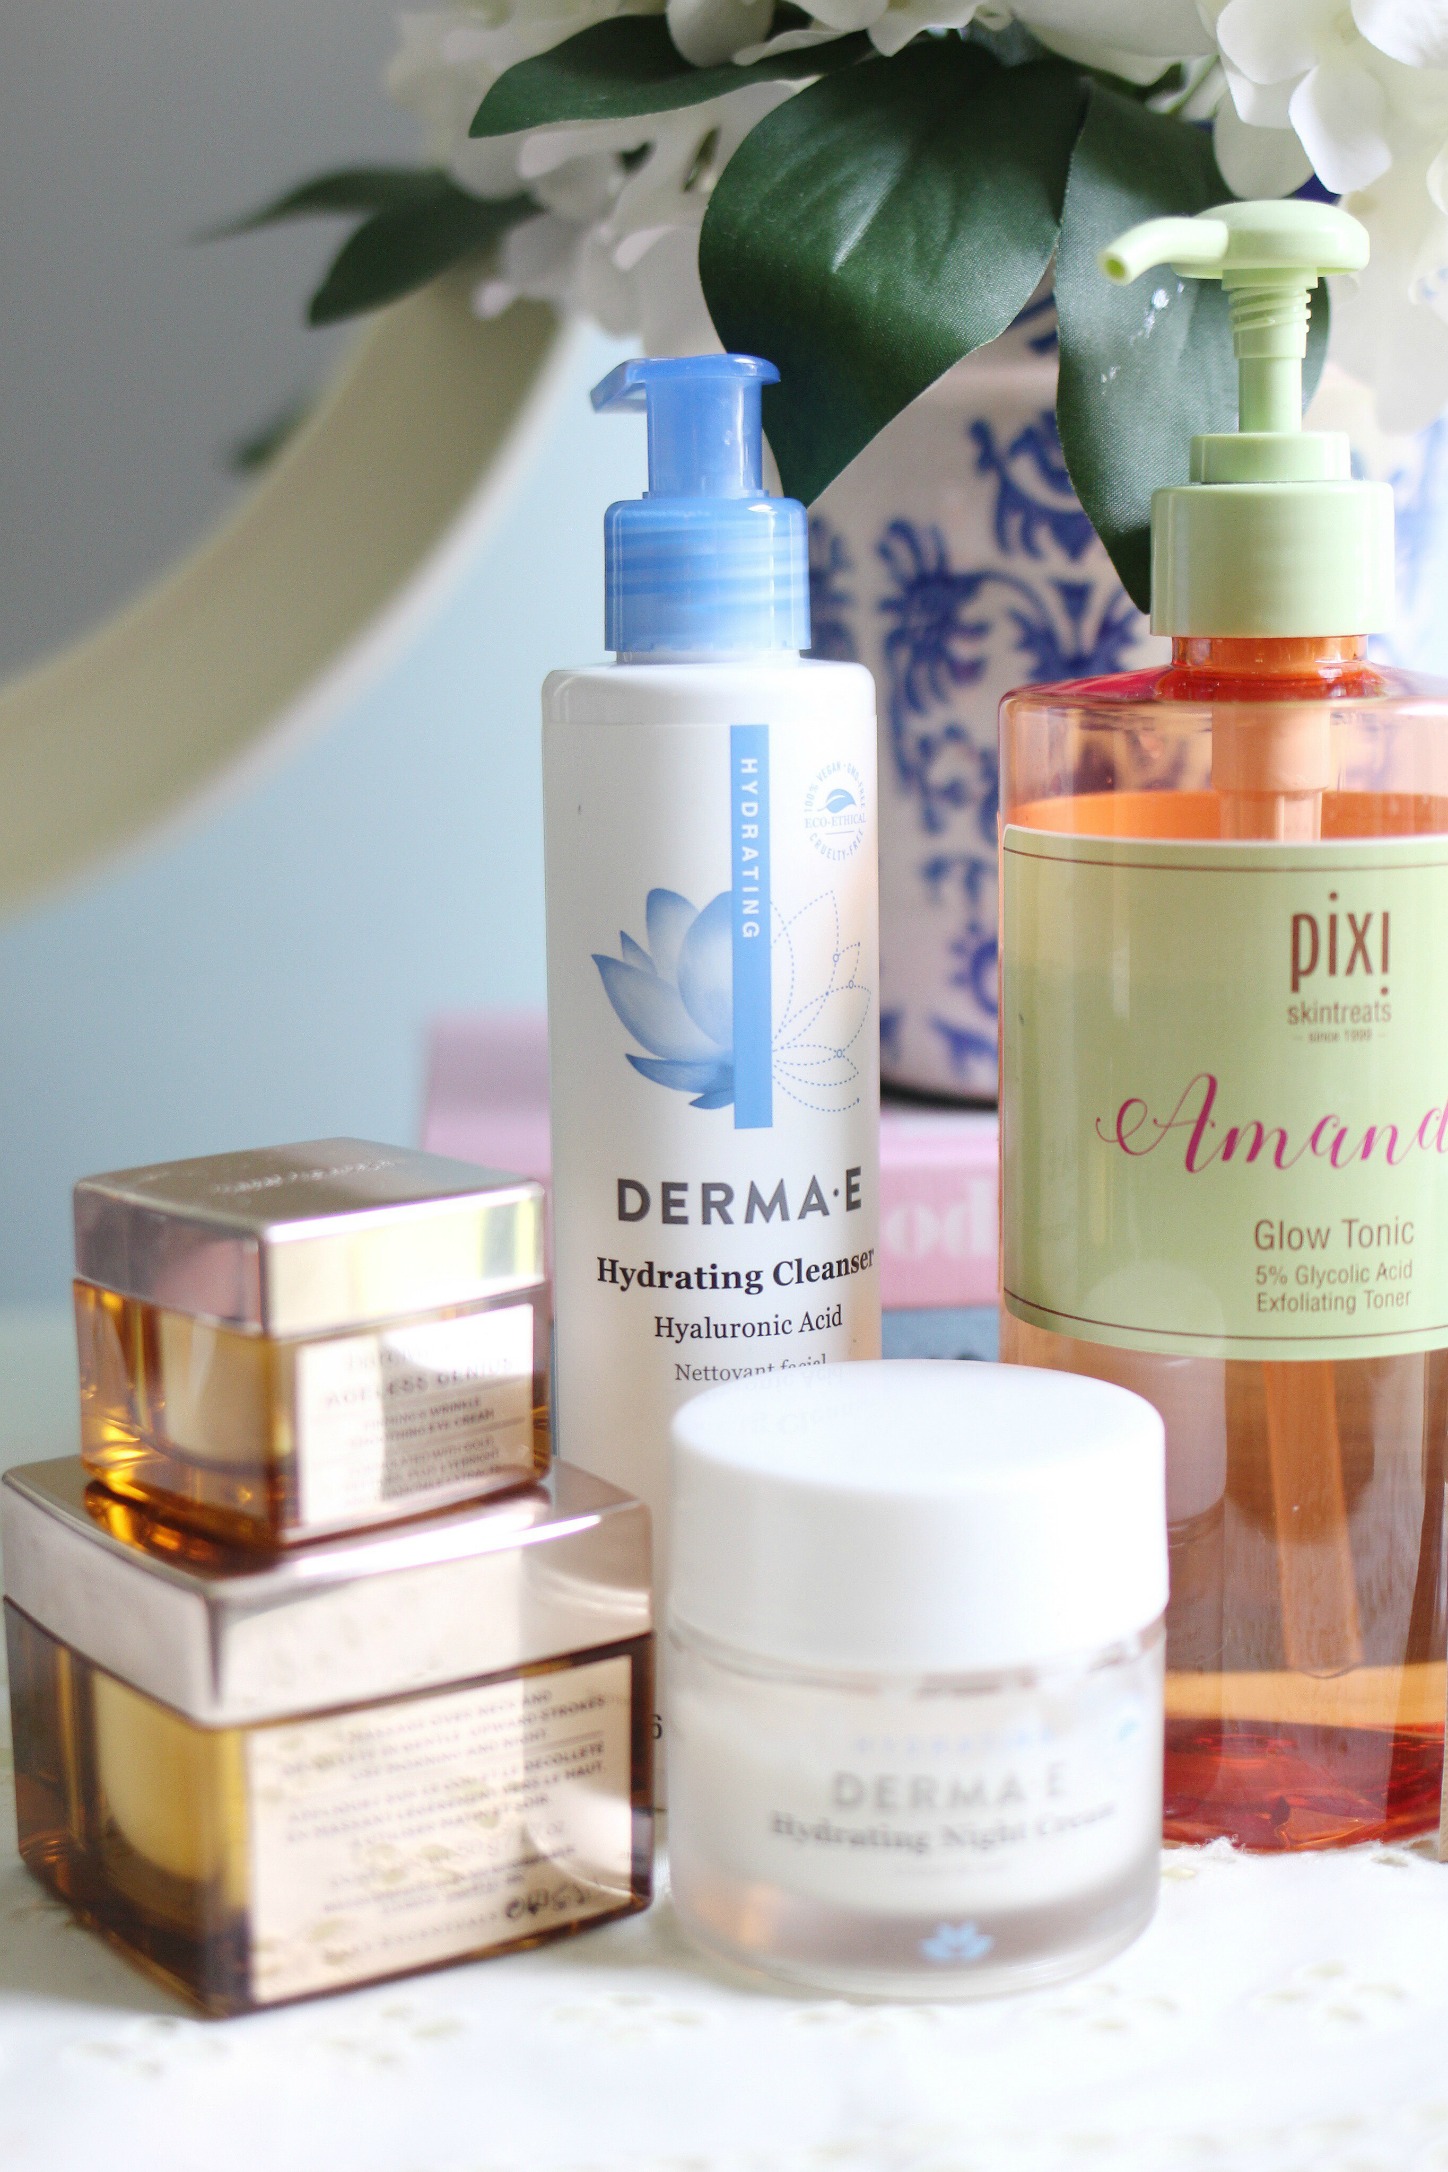 My Postpartum Skincare Routine + Products